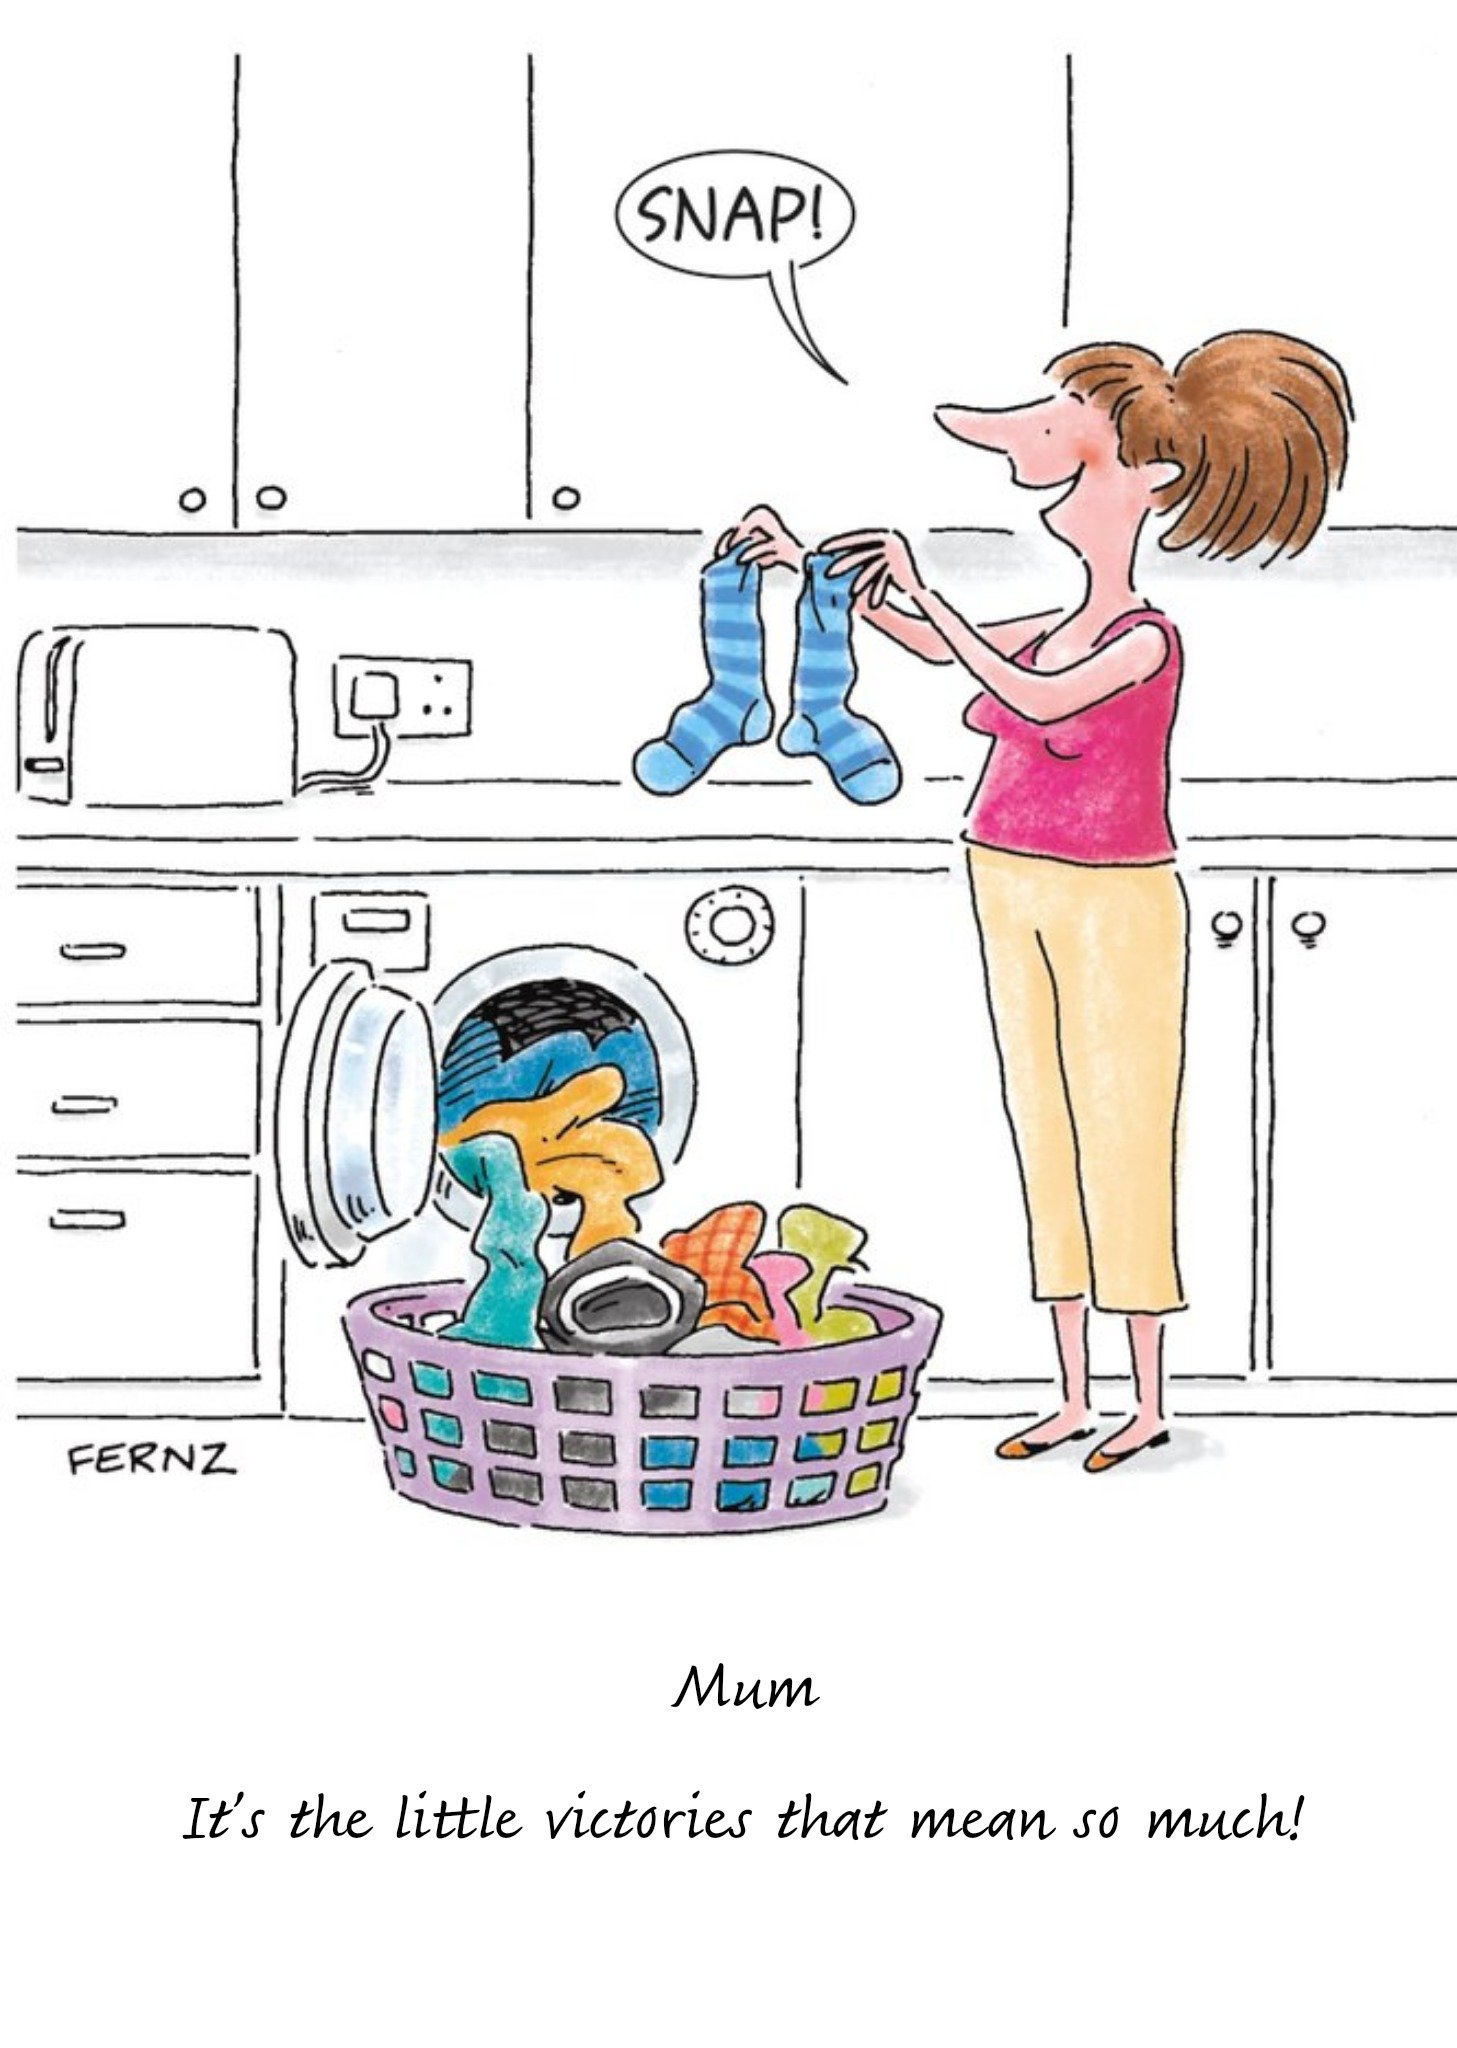 Moonpig Mother's Day Card - Funny Card - Little Victories - Laundry - Matching Socks, Large